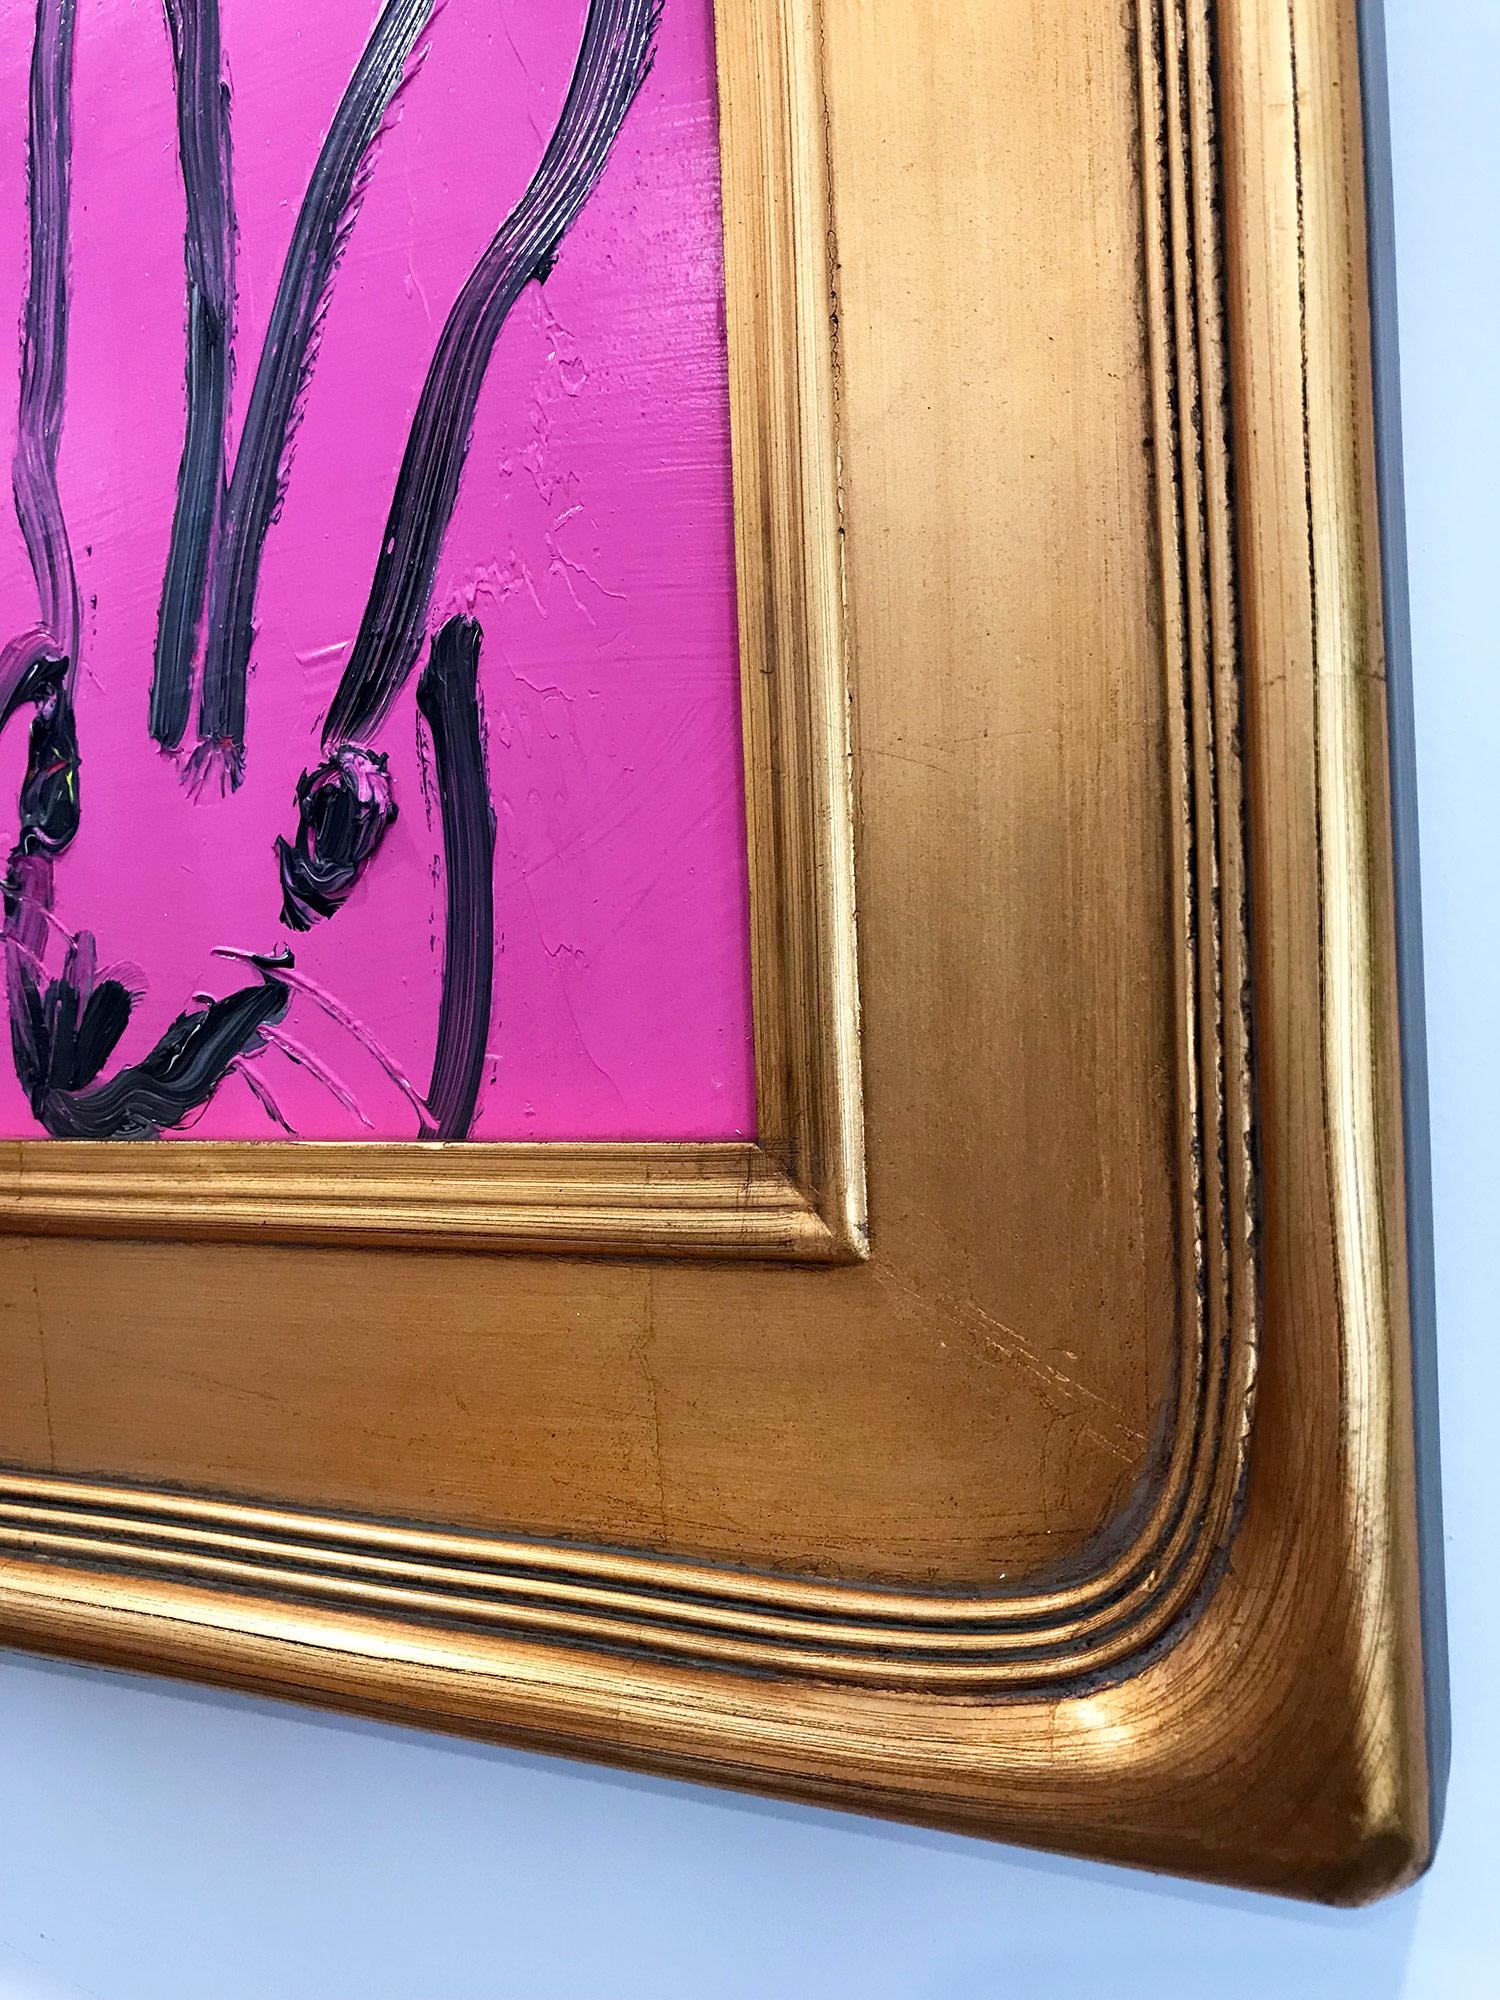 Untitled (Bunny on Hot Pink) 9